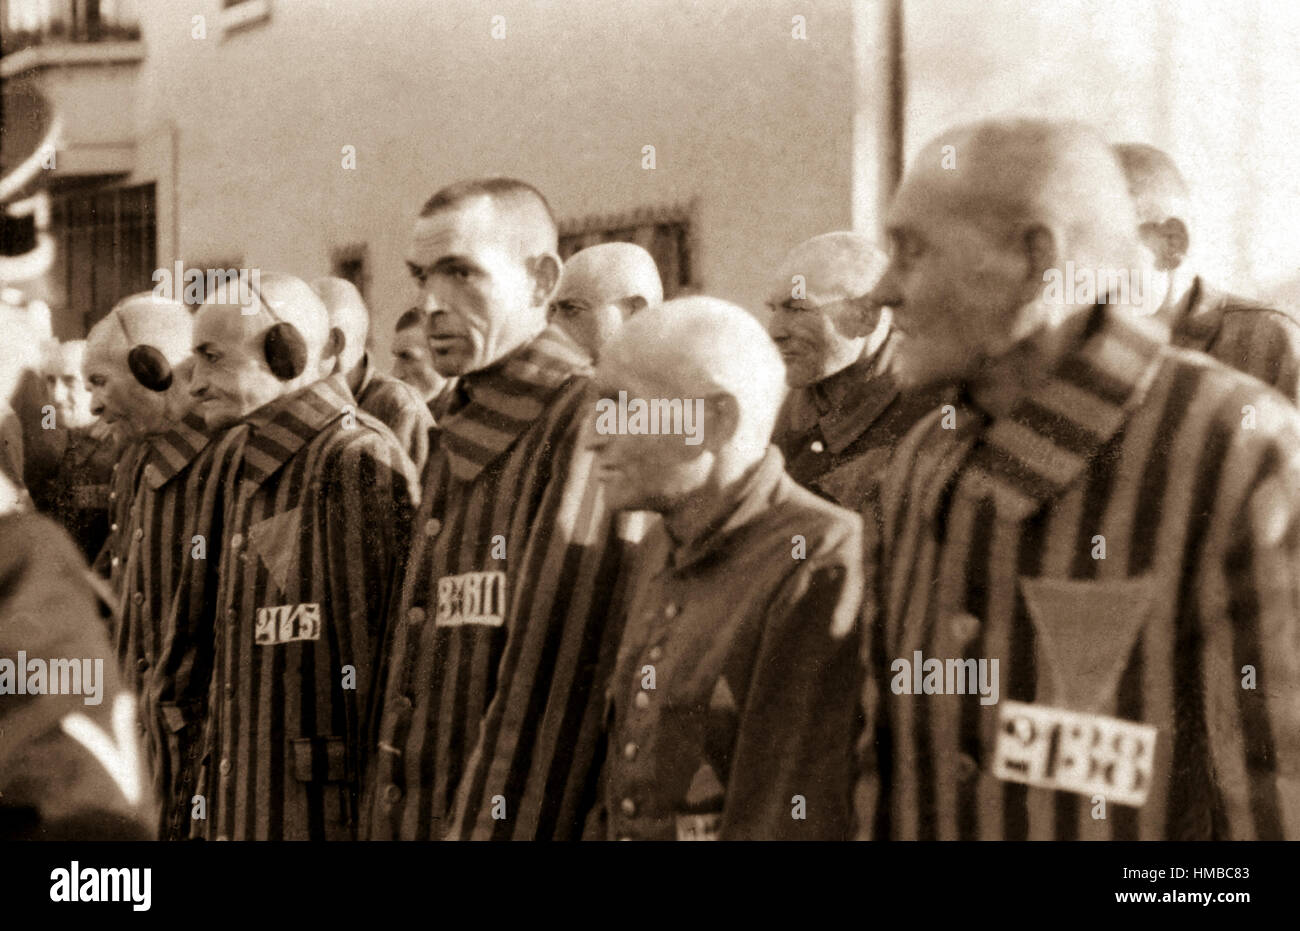 Prisoners in the concentration camp at Sachsenhausen, Germany, December 19, 1938. Heinrich Hoffman Collection.  (Foreign Record Seized) NARA FILE #:  242-HLB-3609-32 WAR & CONFLICT BOOK #:  1273 Stock Photo